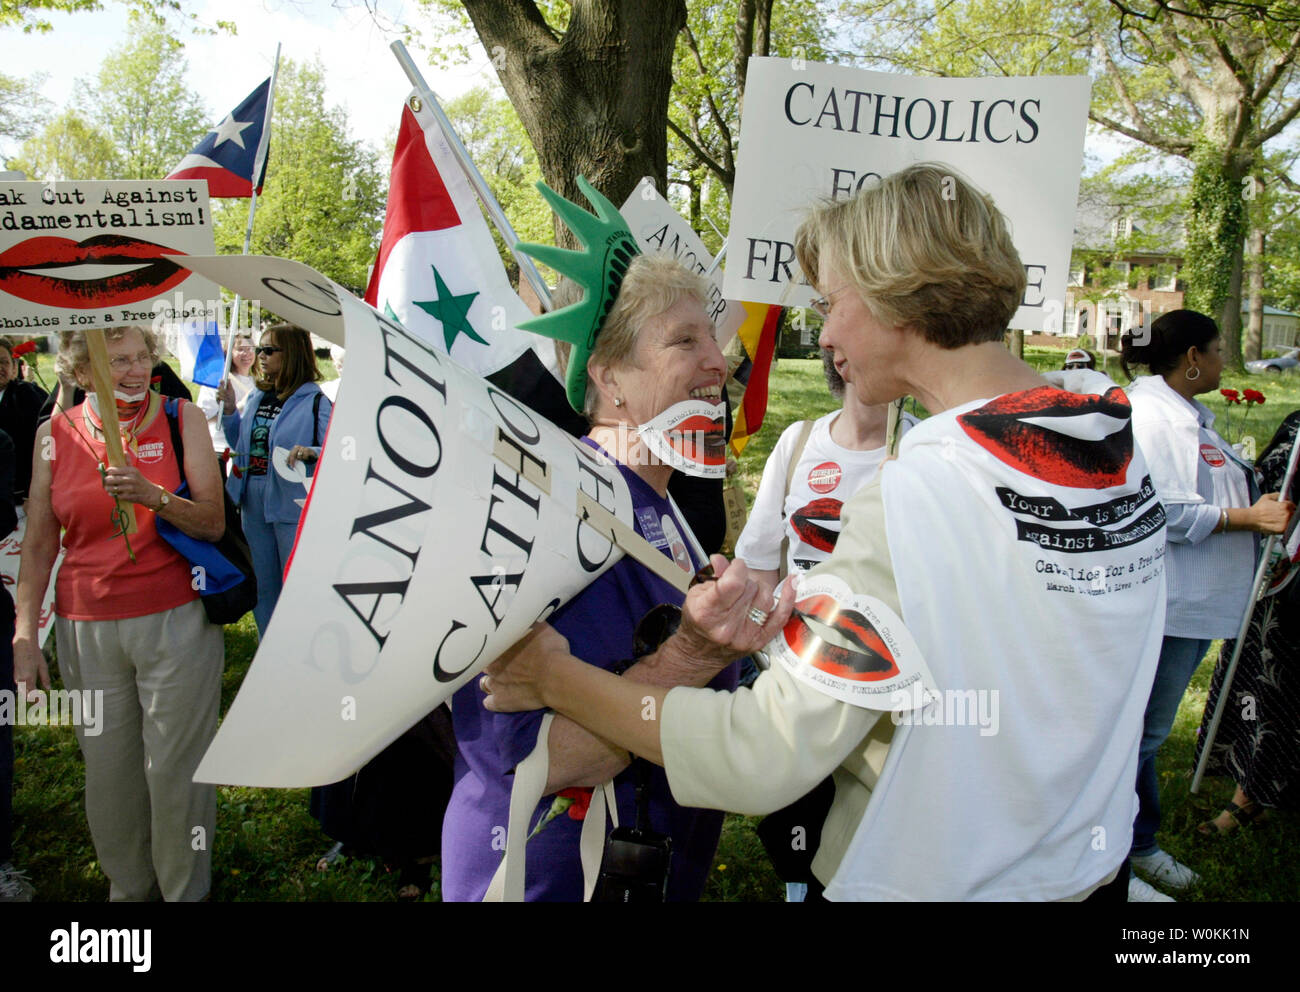 Catholics for a Free Choice activist Carol Wall (L) from Boston greets Katie Early, North Caroline before march to the Vatican Embassy in Washington, April 24, 2004. (UPI Photo/Yuri Gripas) Stock Photo